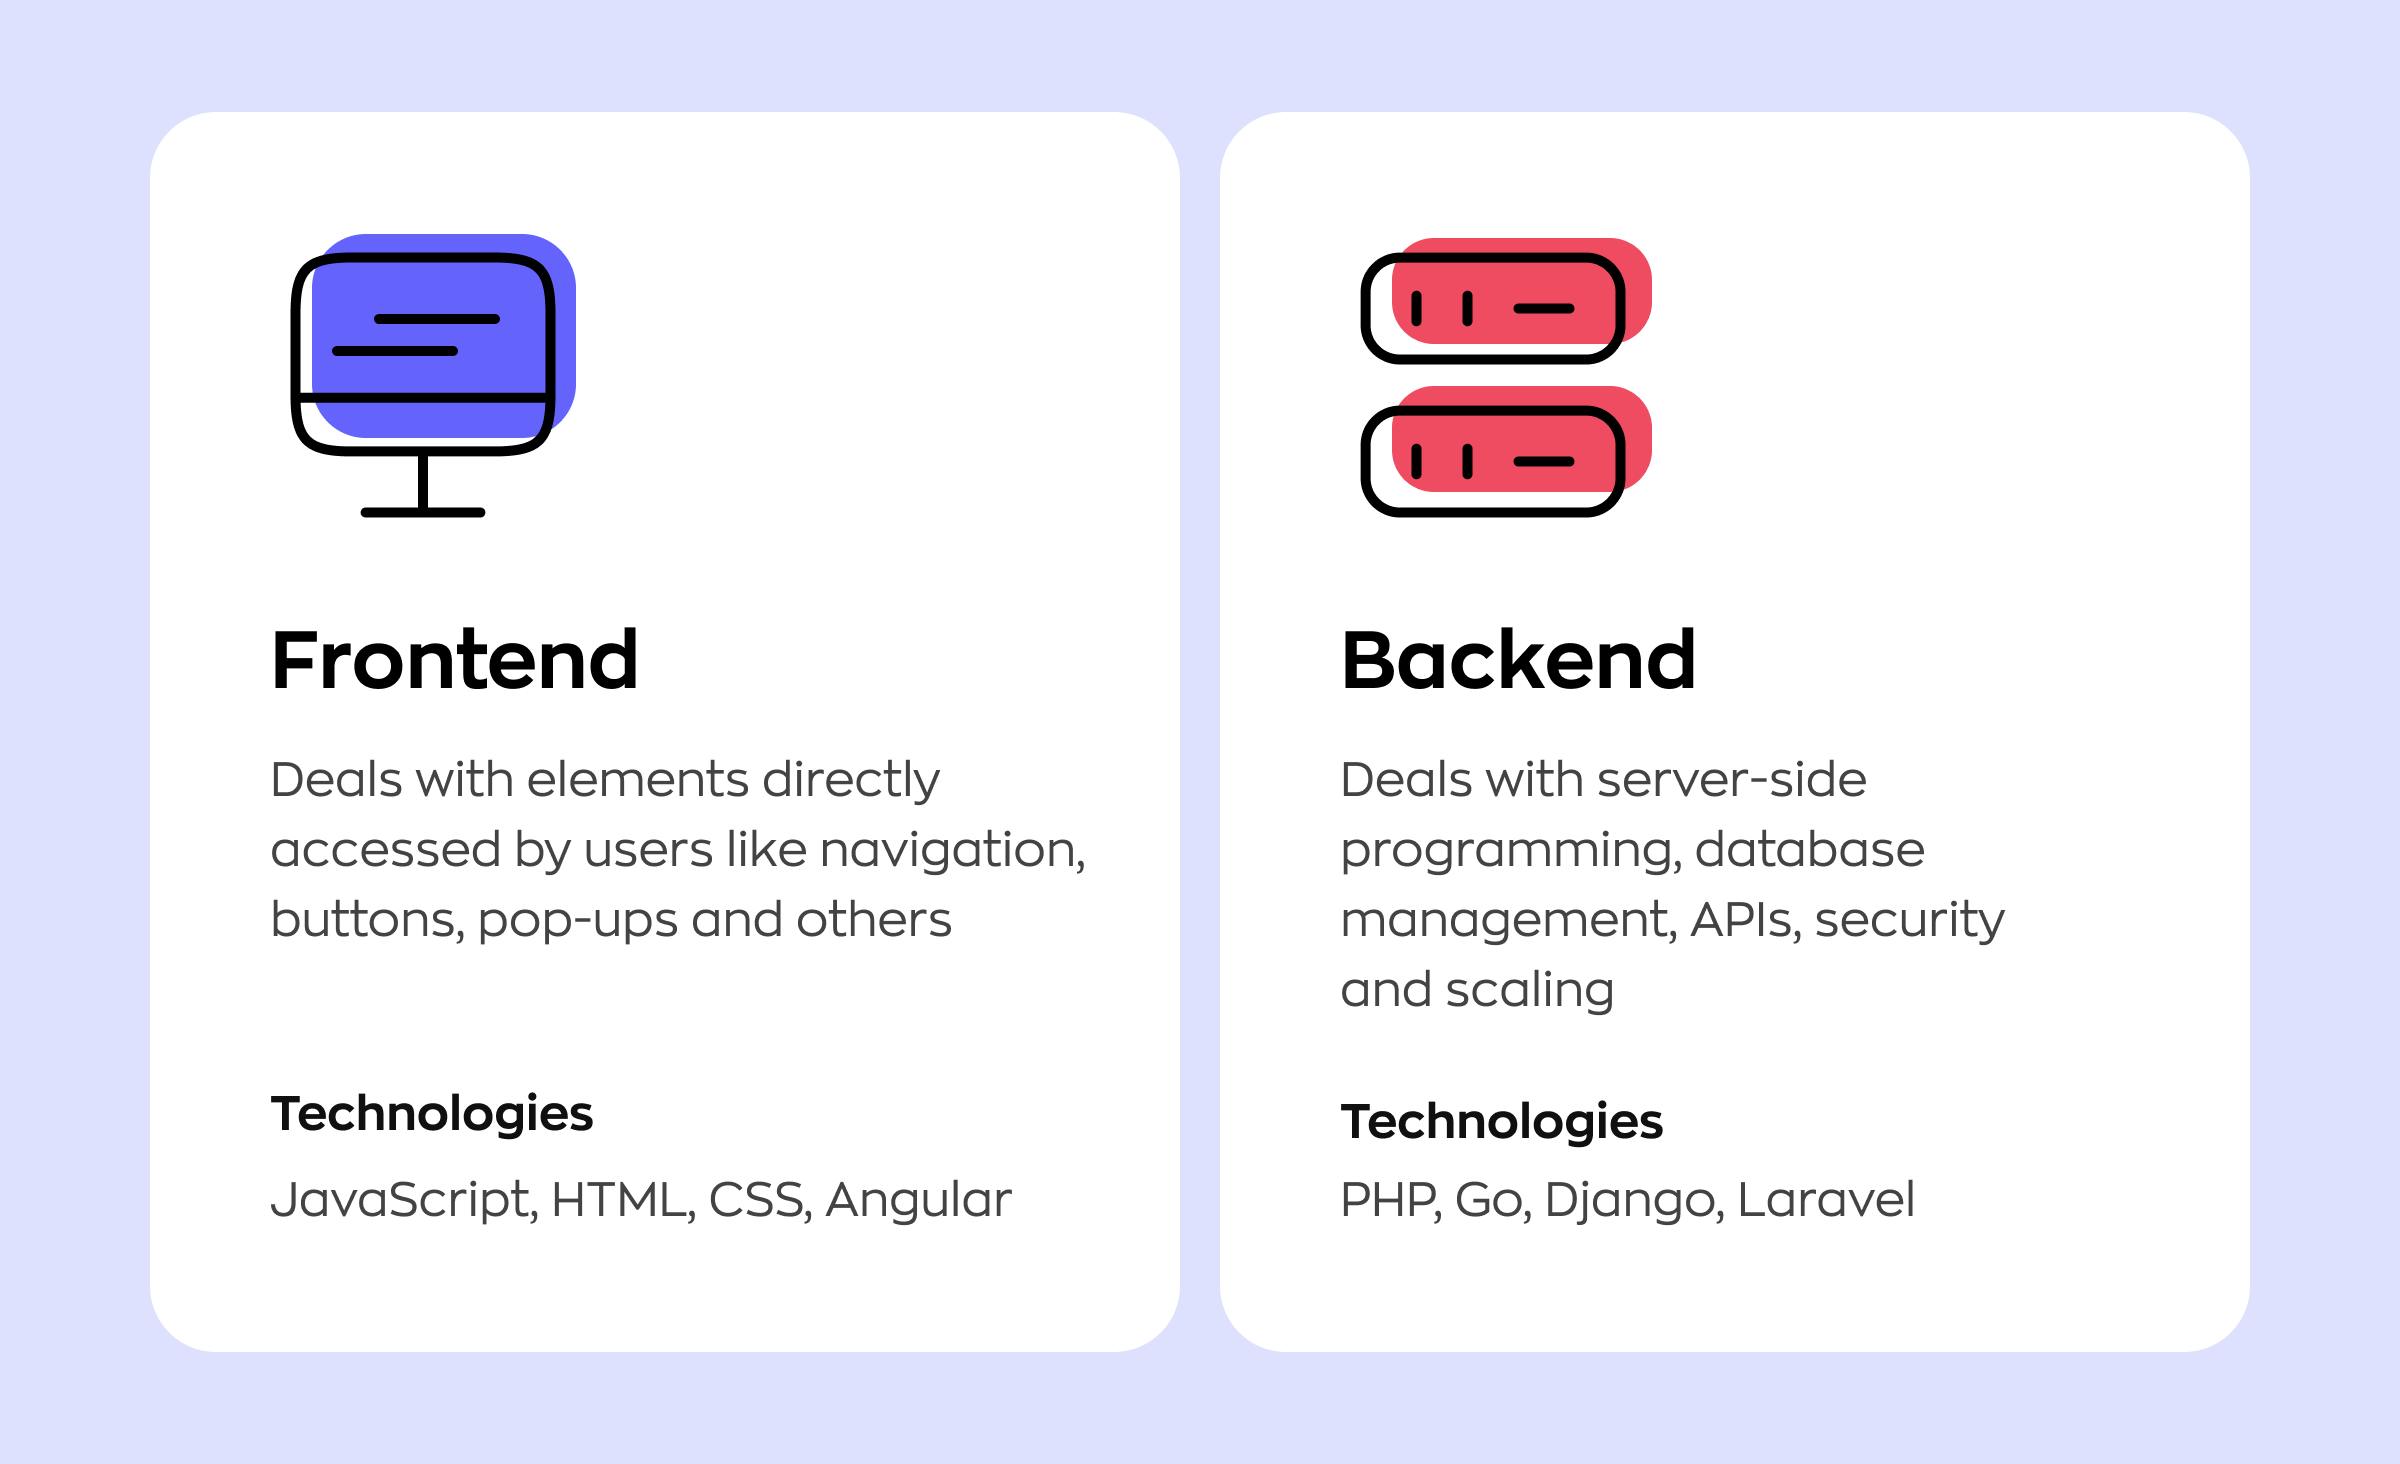 Frontend and backend technologies are essential parts of any application technology stack